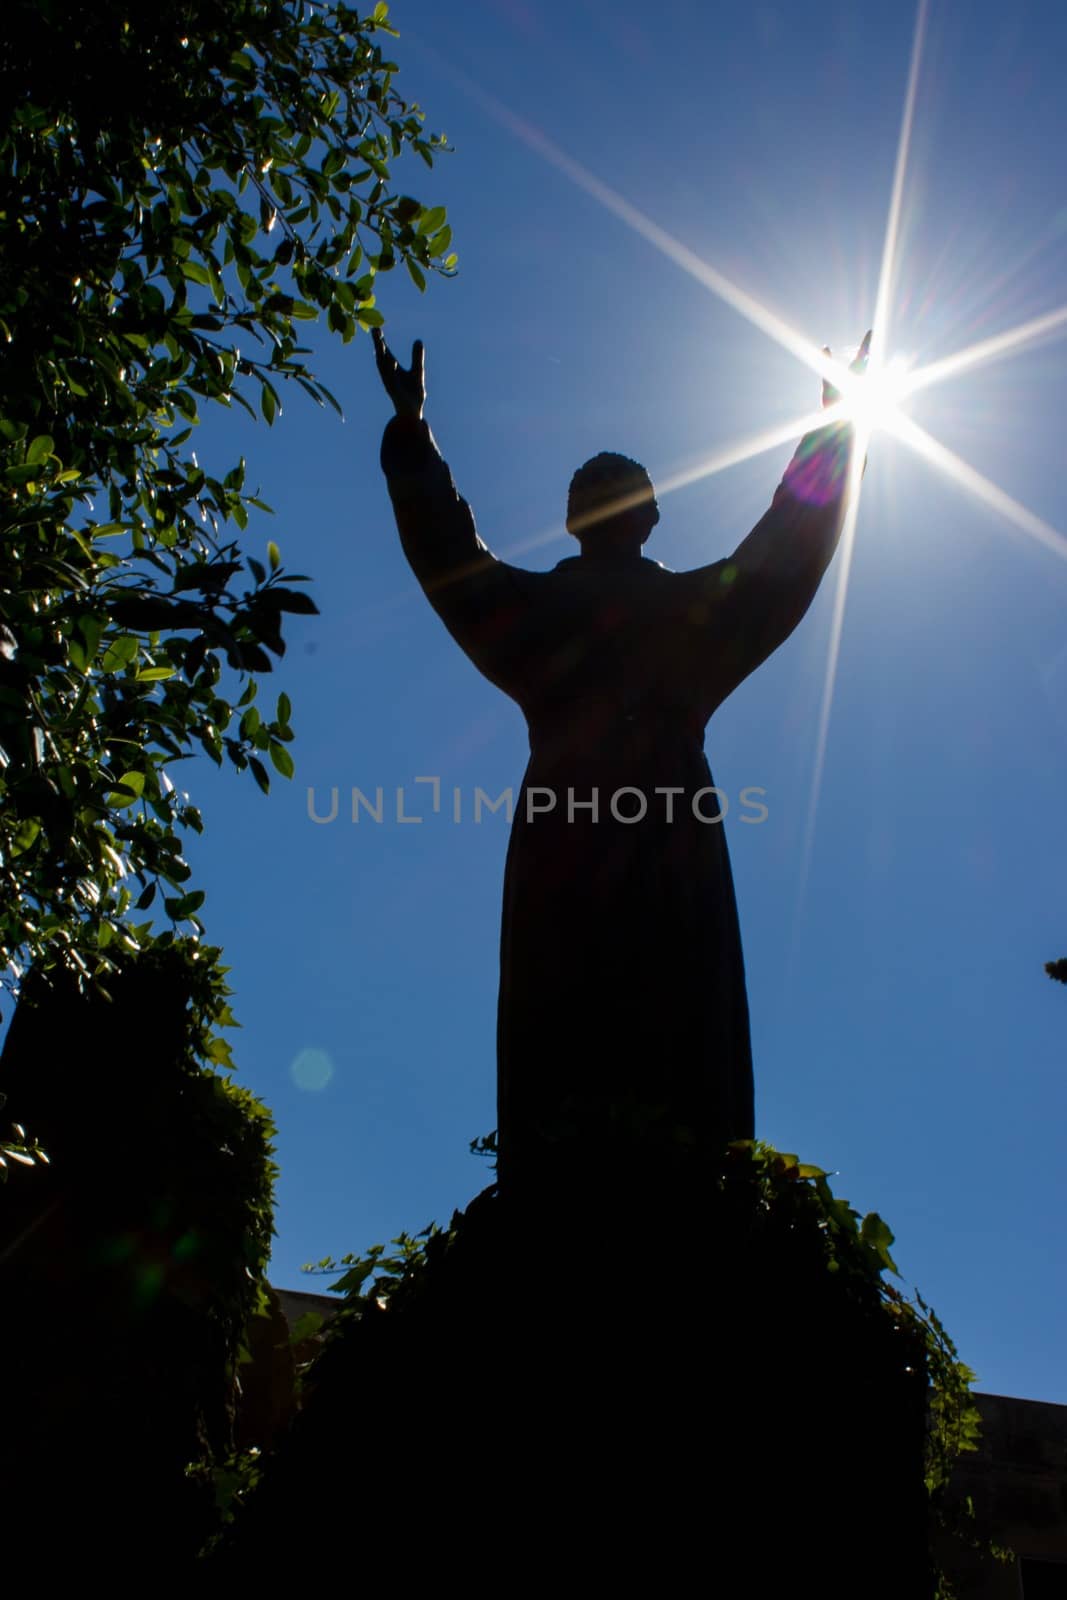 the patron saint of Italy, Francis of Assisi, who established the order of the Franciscans
